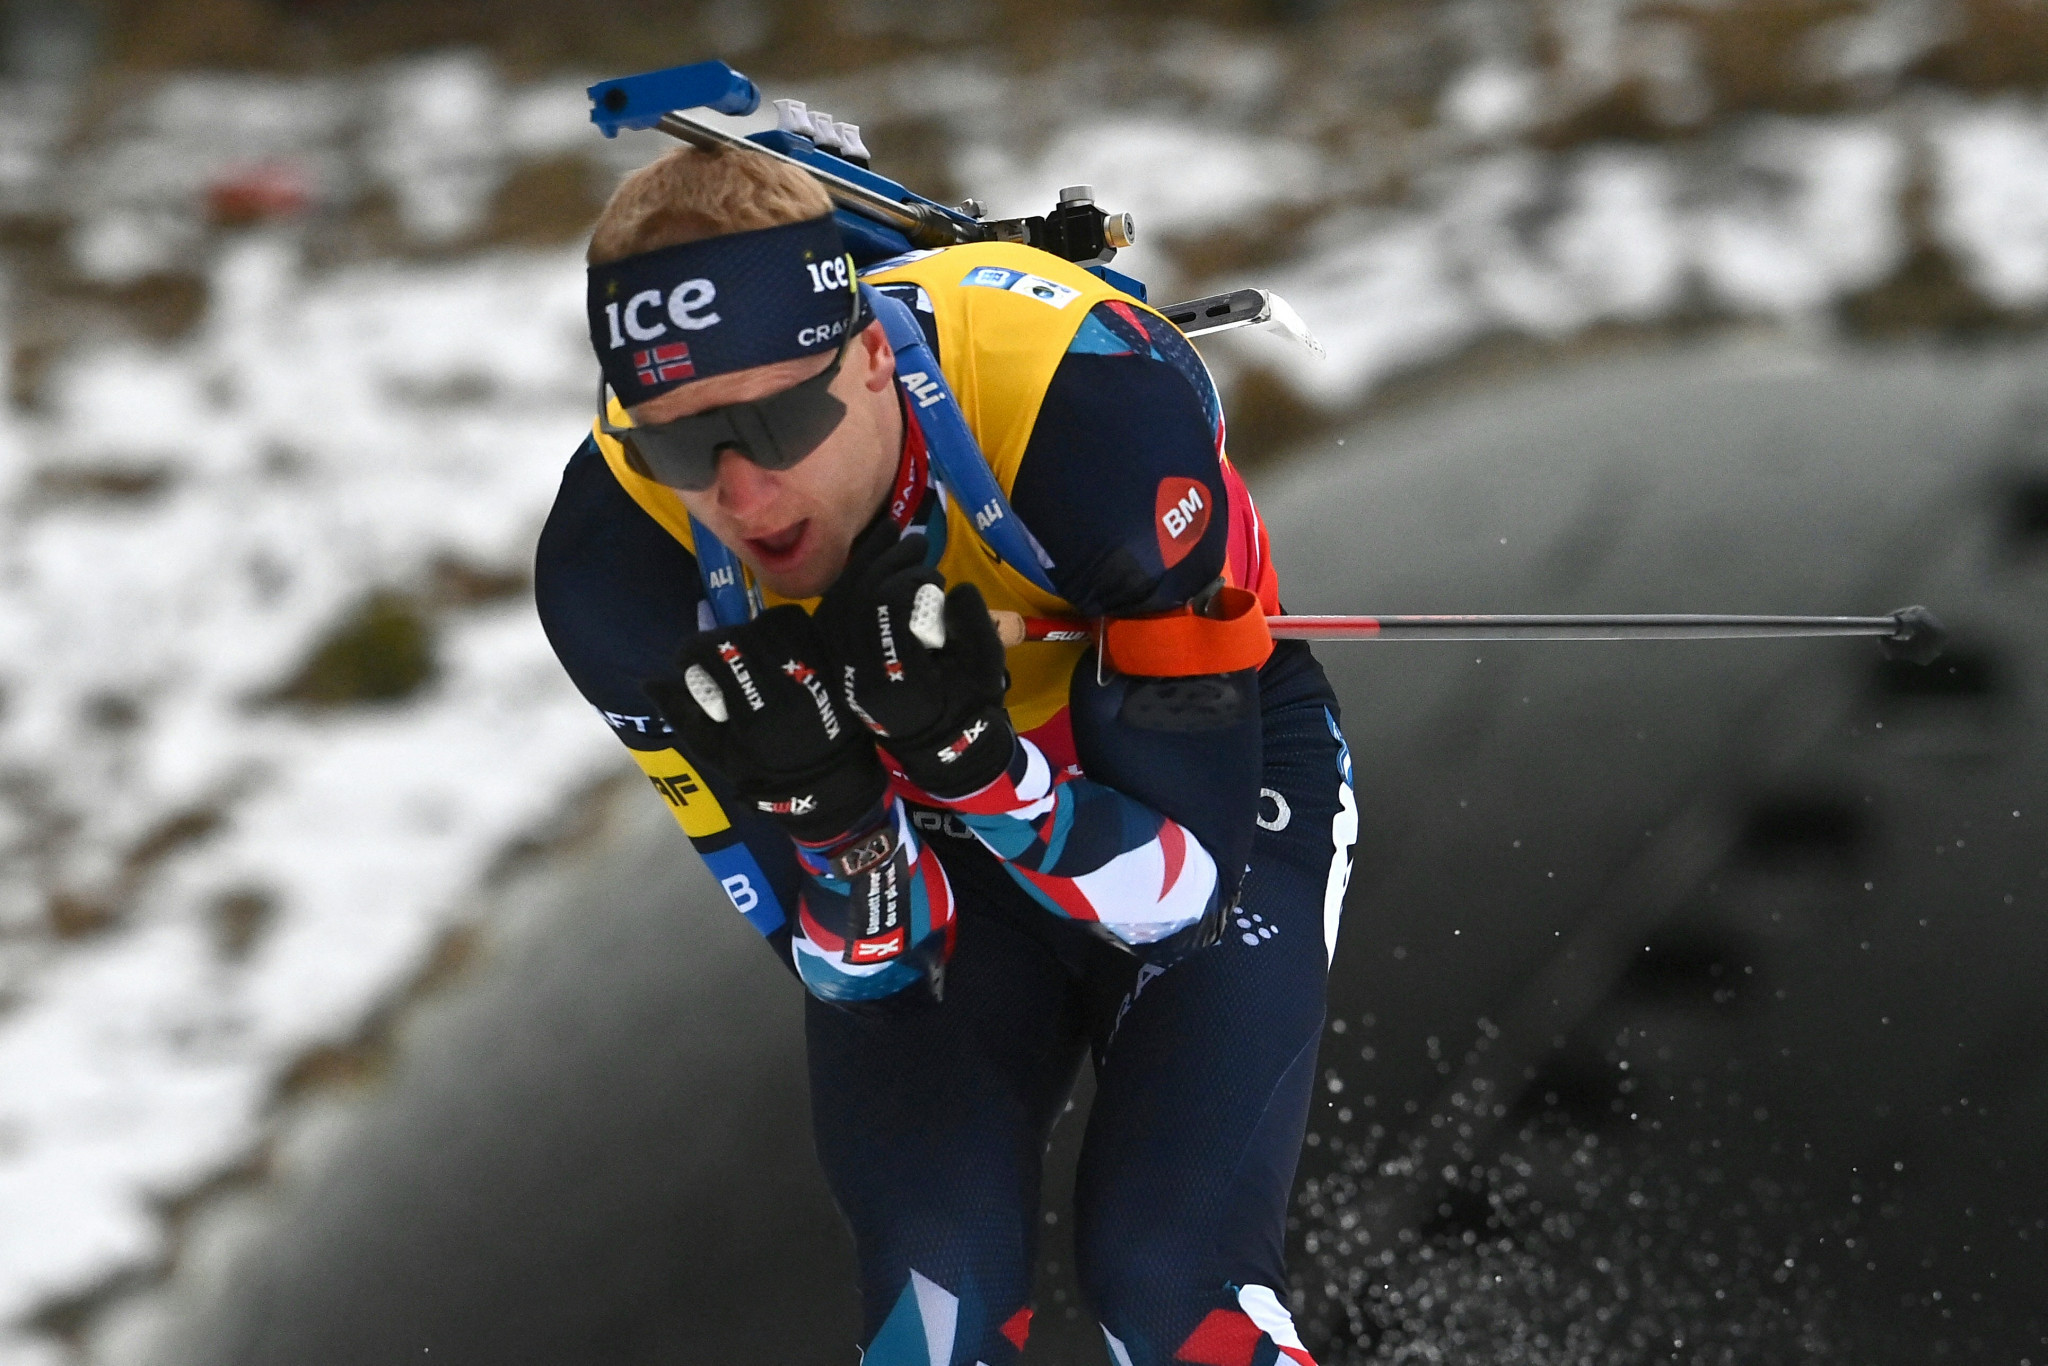 Norway's Johannes Thingnes Bø missed the individual race at the IBU World Cup in Östersund with COVID-19, but cannot be caught in the overall standings ©Getty Images